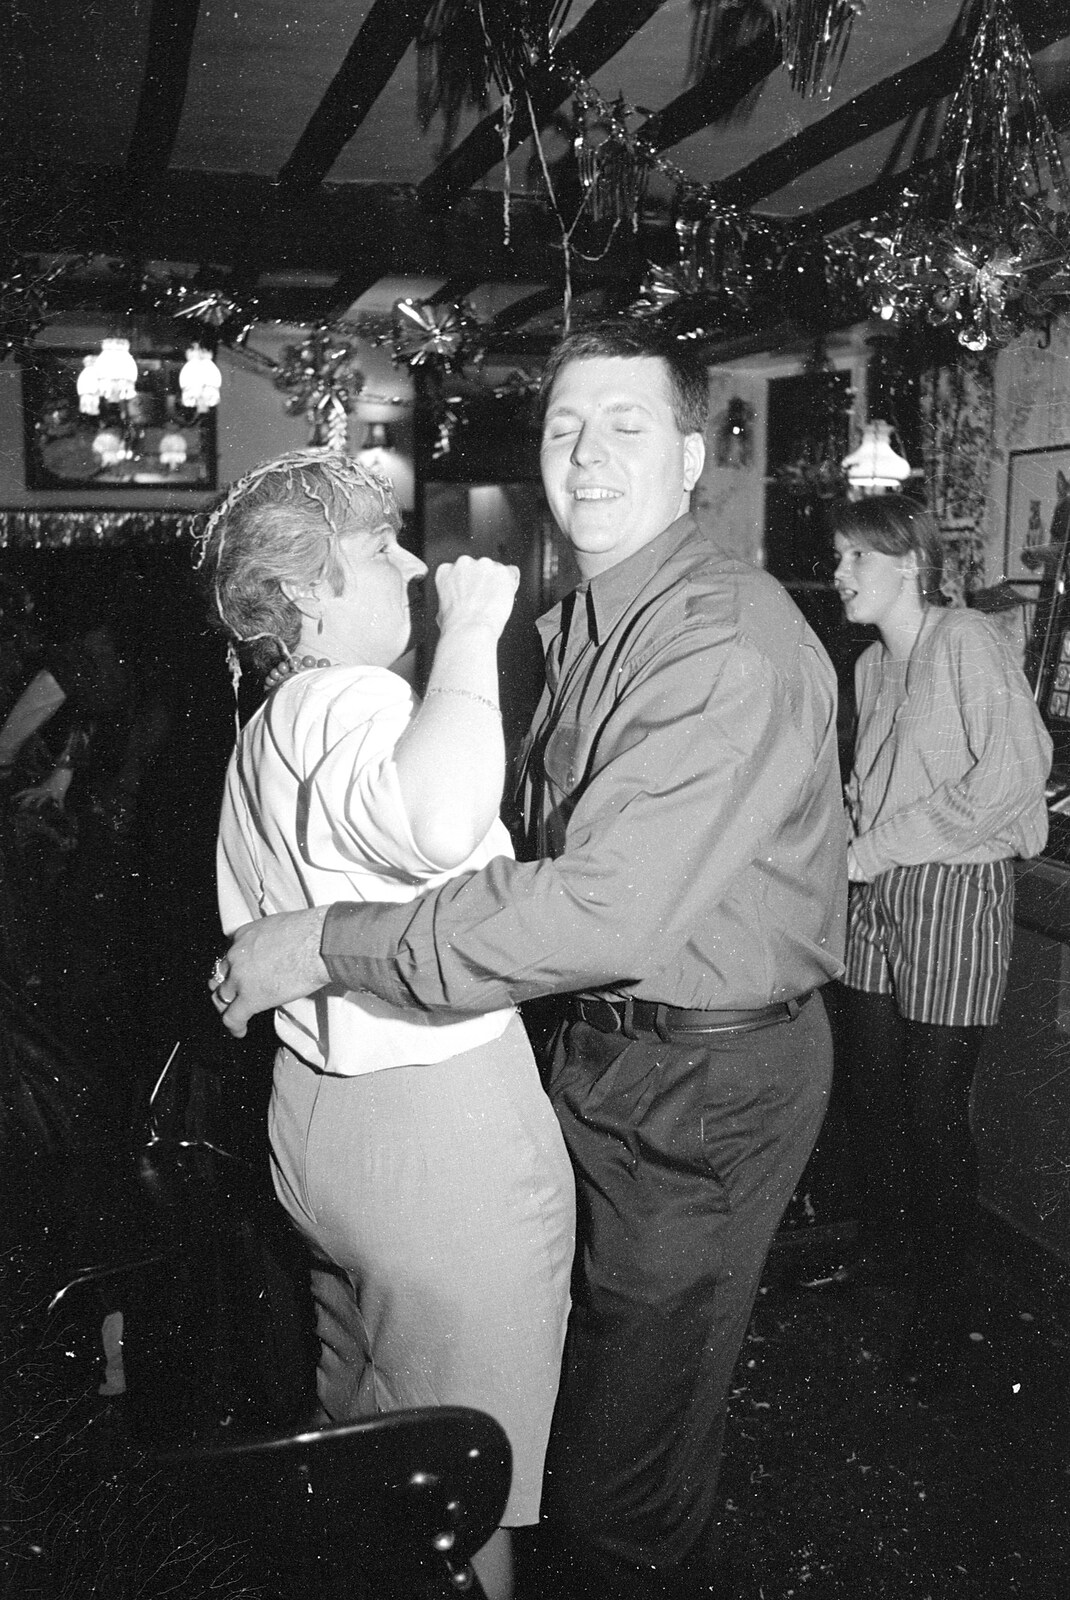 Spam and Barry have a dance from New Year's Eve at the Swan Inn, Brome, Suffolk - 31st December 1992